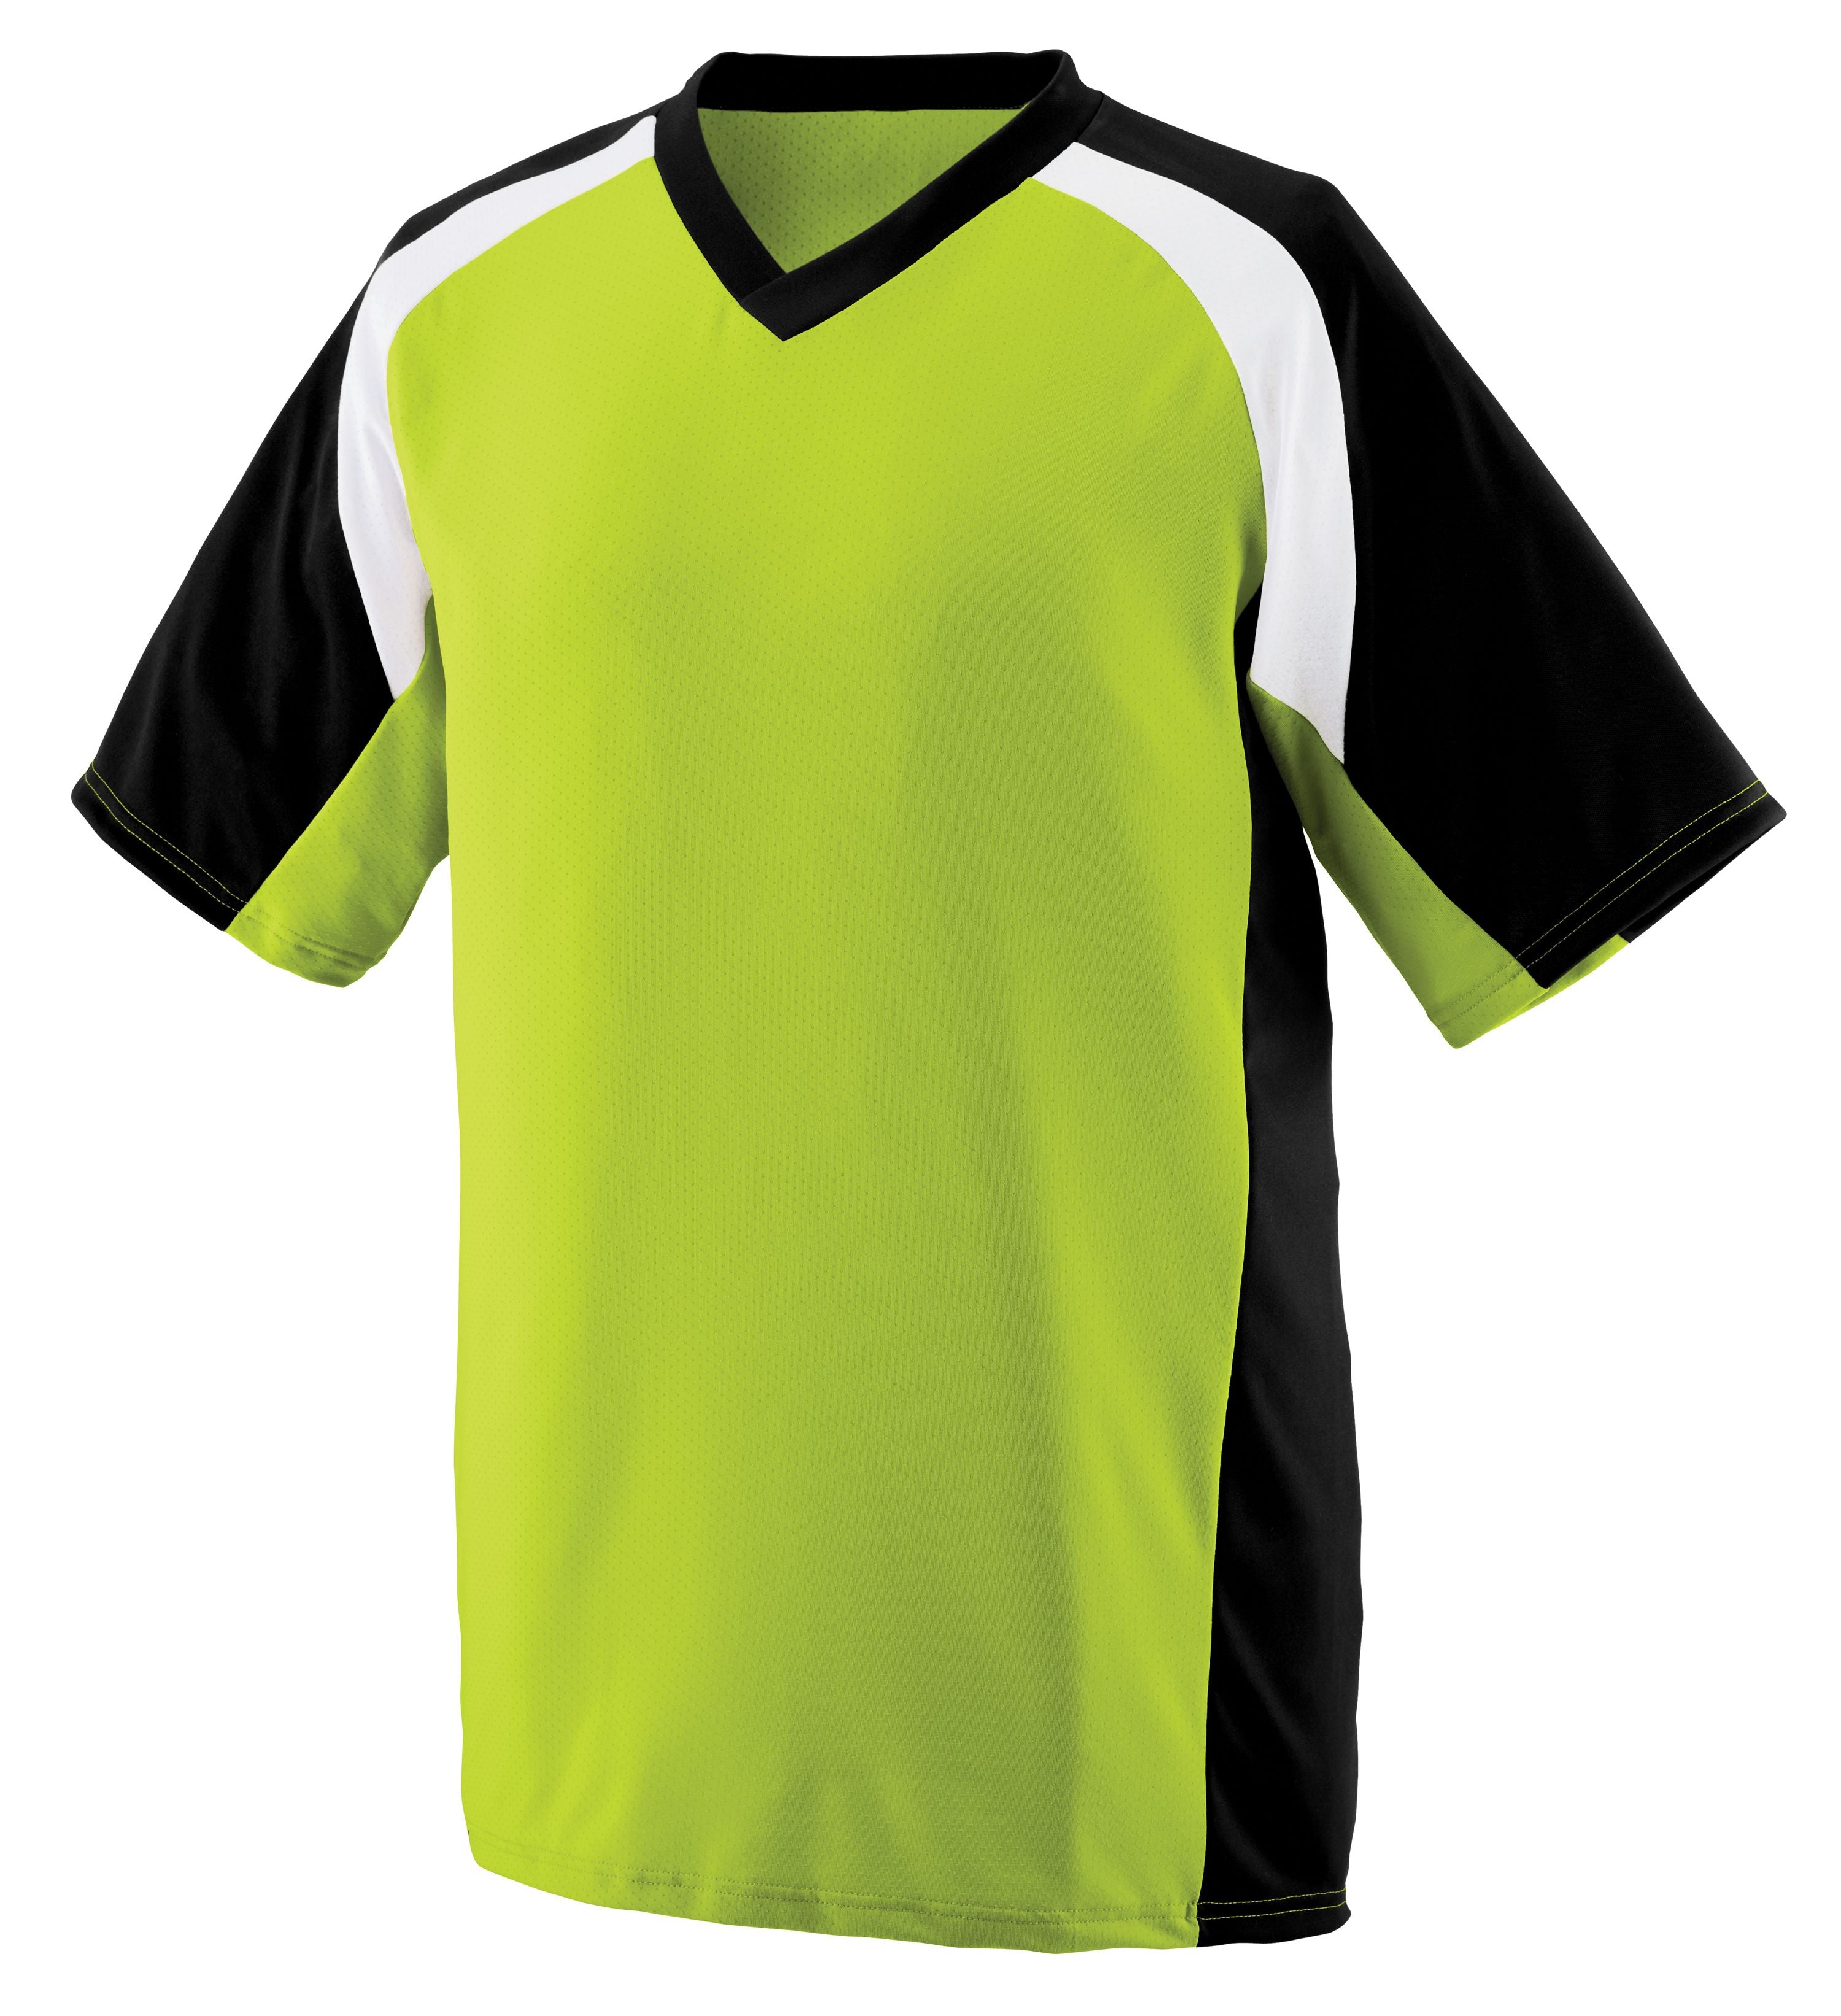 Augusta Sportswear Nitro Jersey in Lime/Black/White  -Part of the Adult, Adult-Jersey, Augusta-Products, Football, Shirts, All-Sports, All-Sports-1 product lines at KanaleyCreations.com